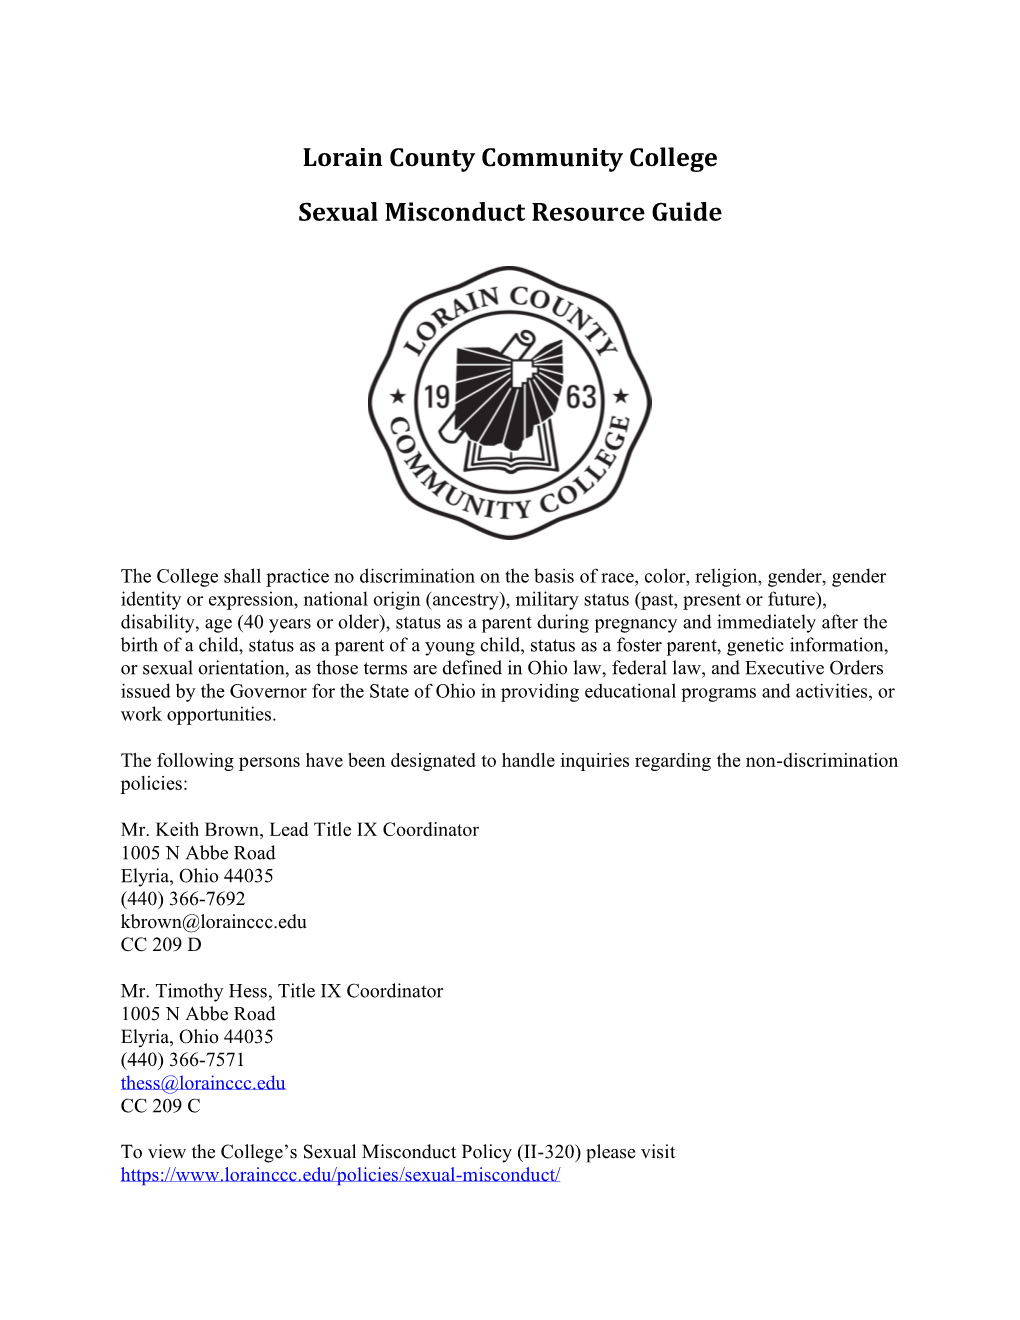 Sexual Misconduct Resource Guide